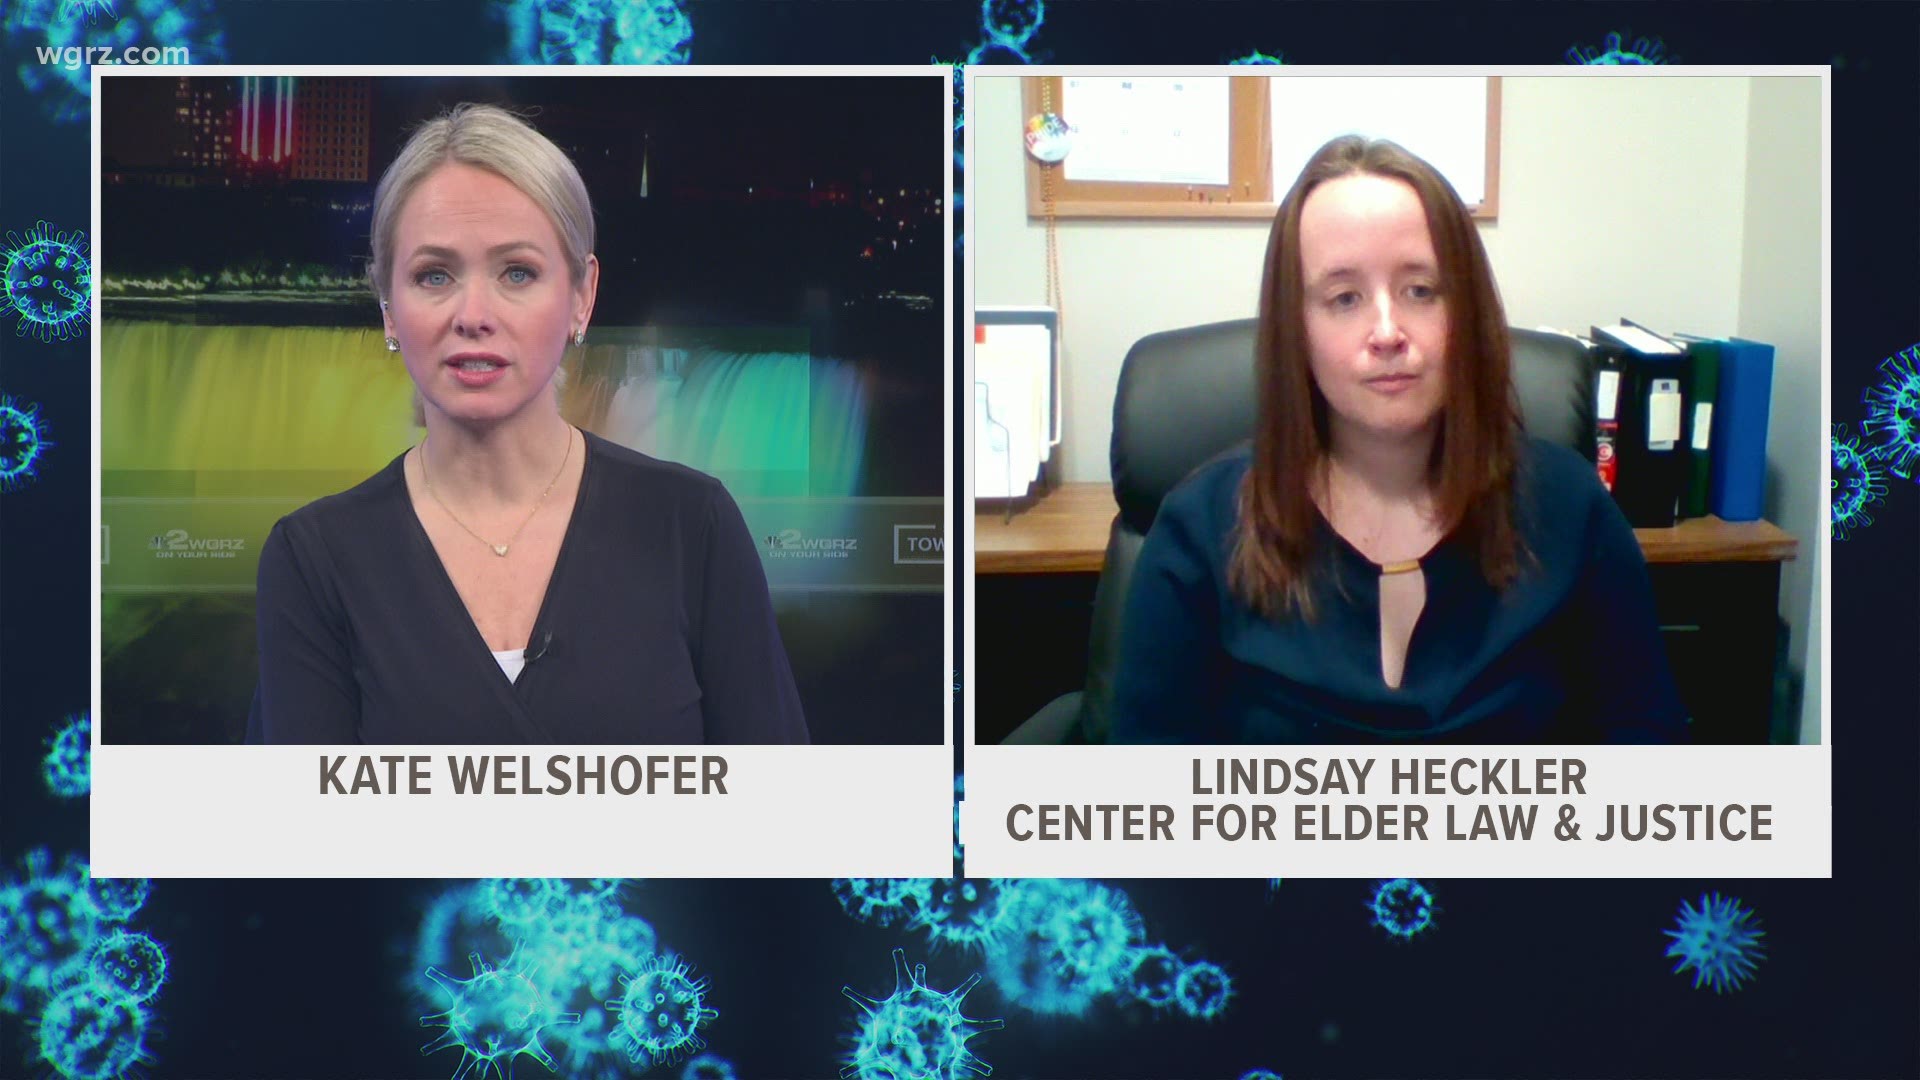 Lindsay Heckler. She's a Supervising Attorney at the Center for Elder Law and Justice here in Buffalo joins on our town hall to discuss Nursing Homes.